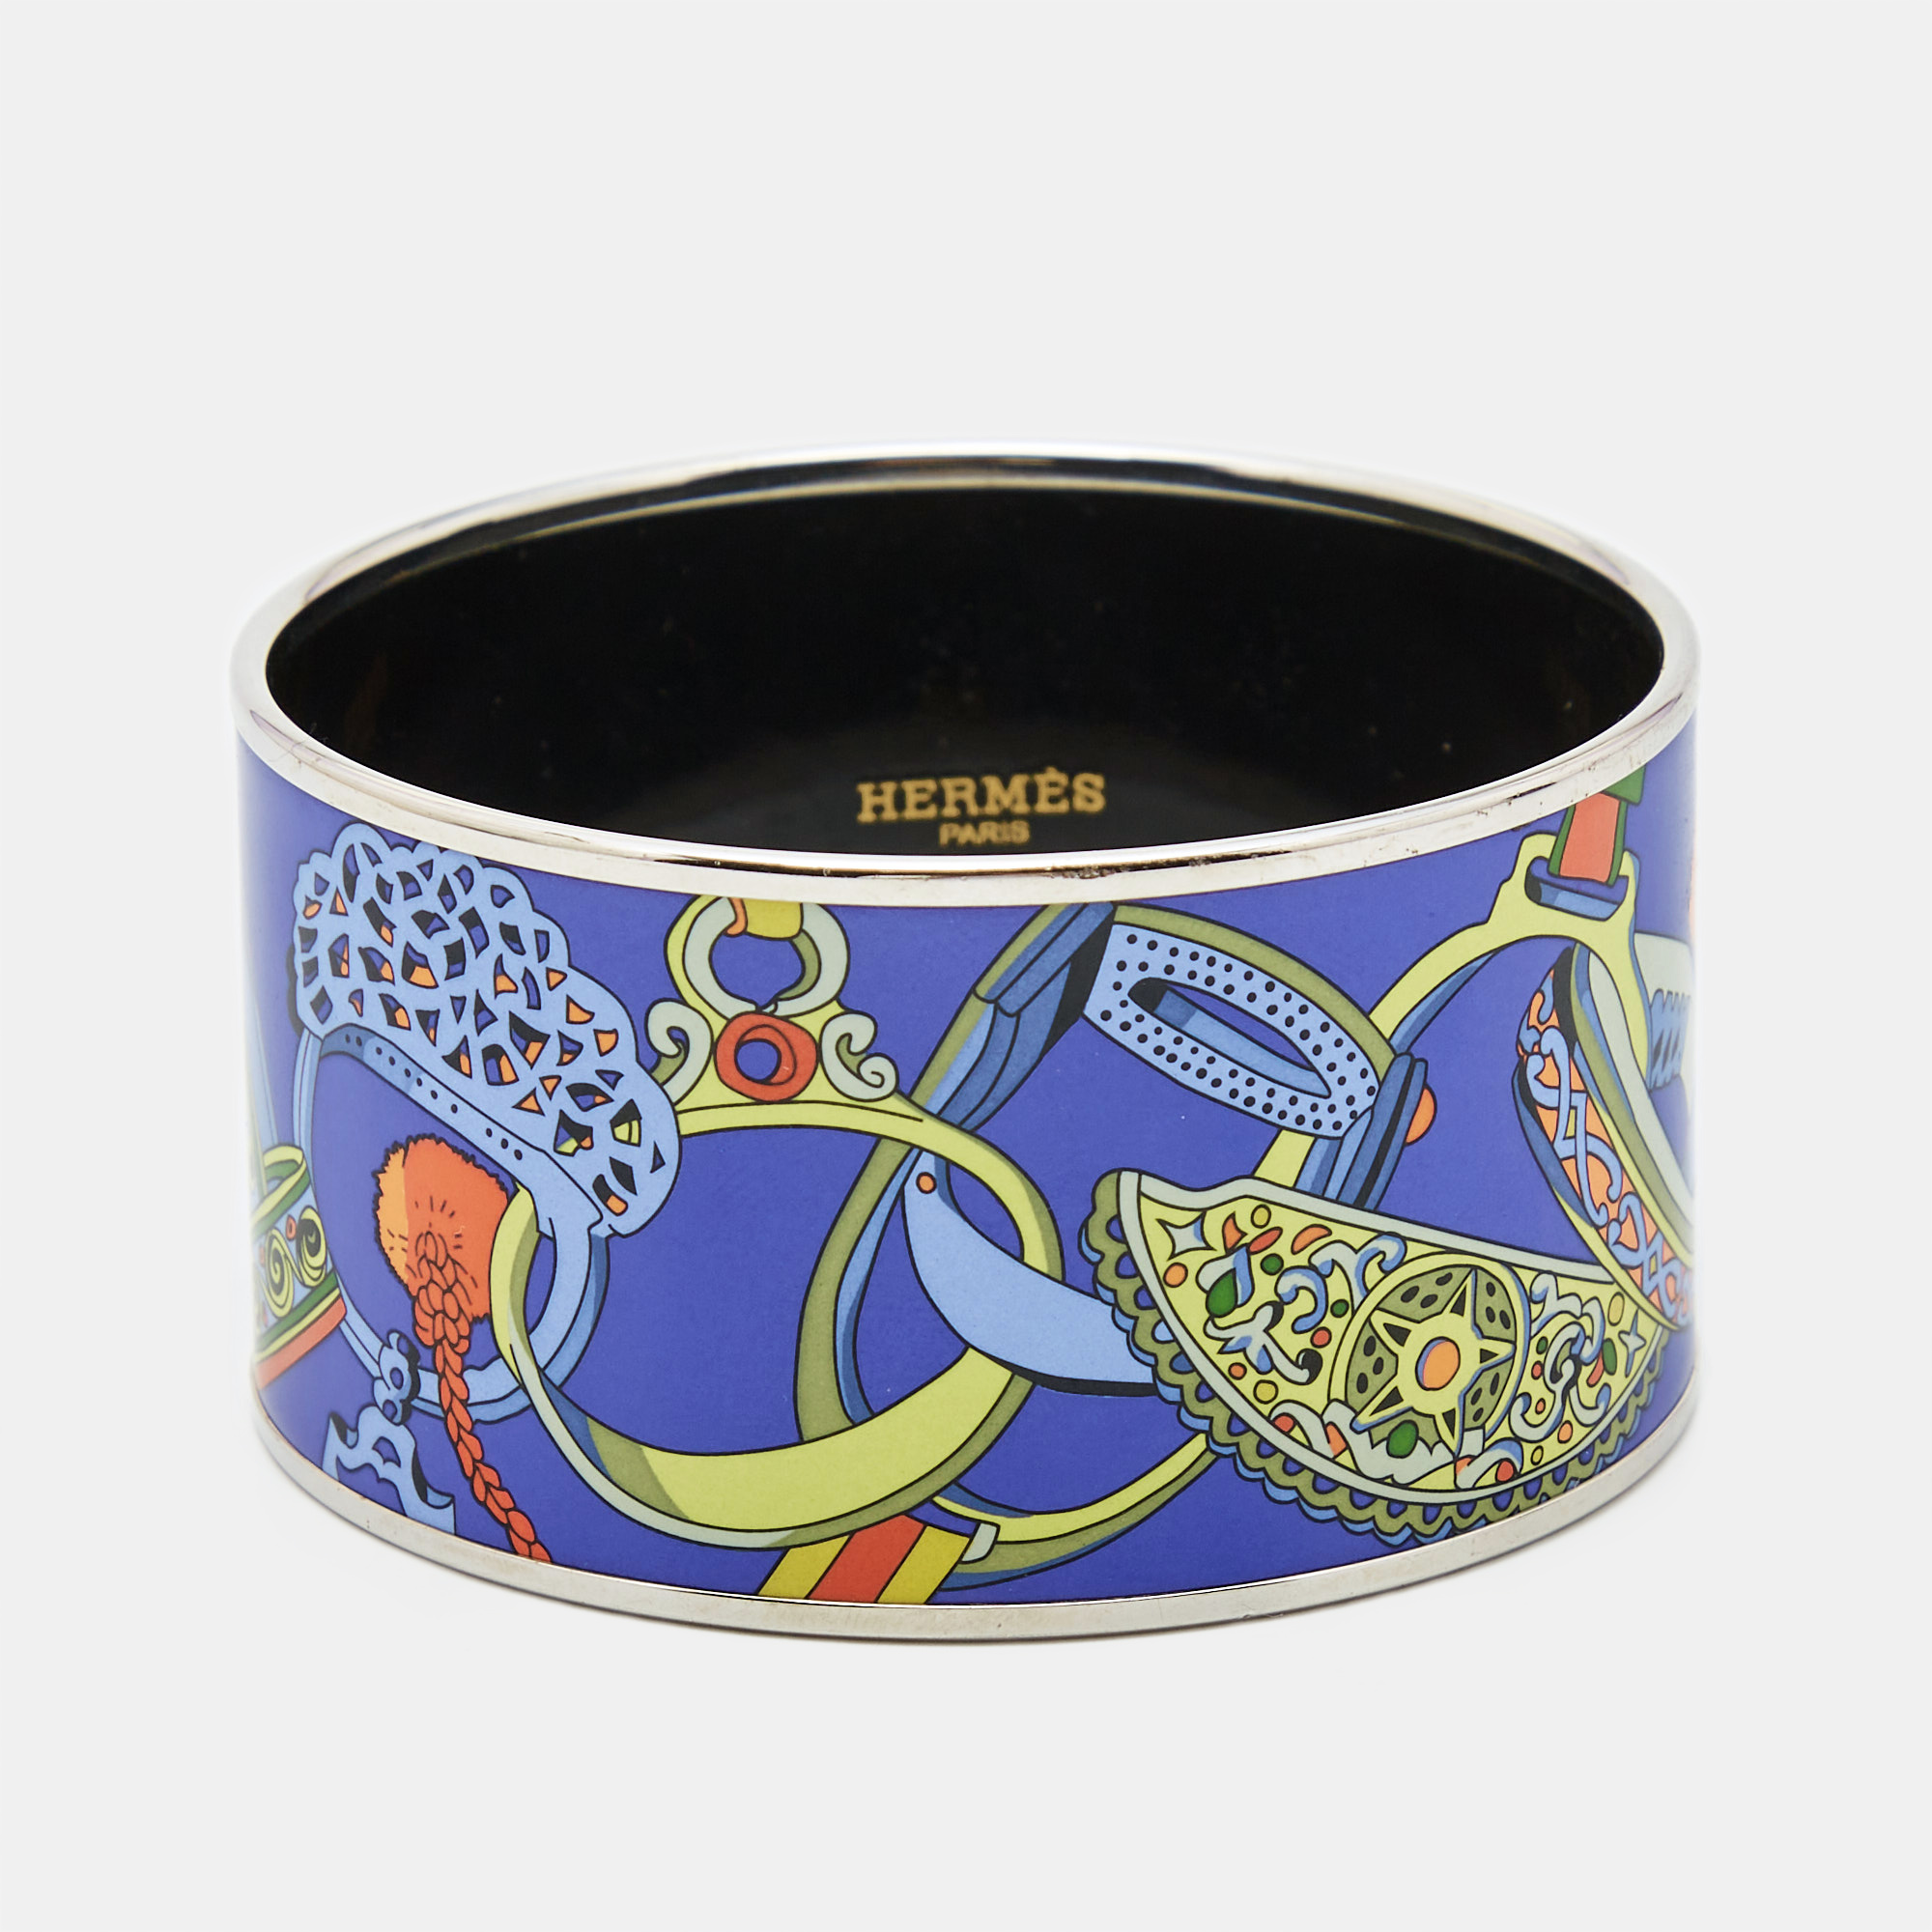 Hermes concours d'etriers printed enamel gold plated extra wide bracelet